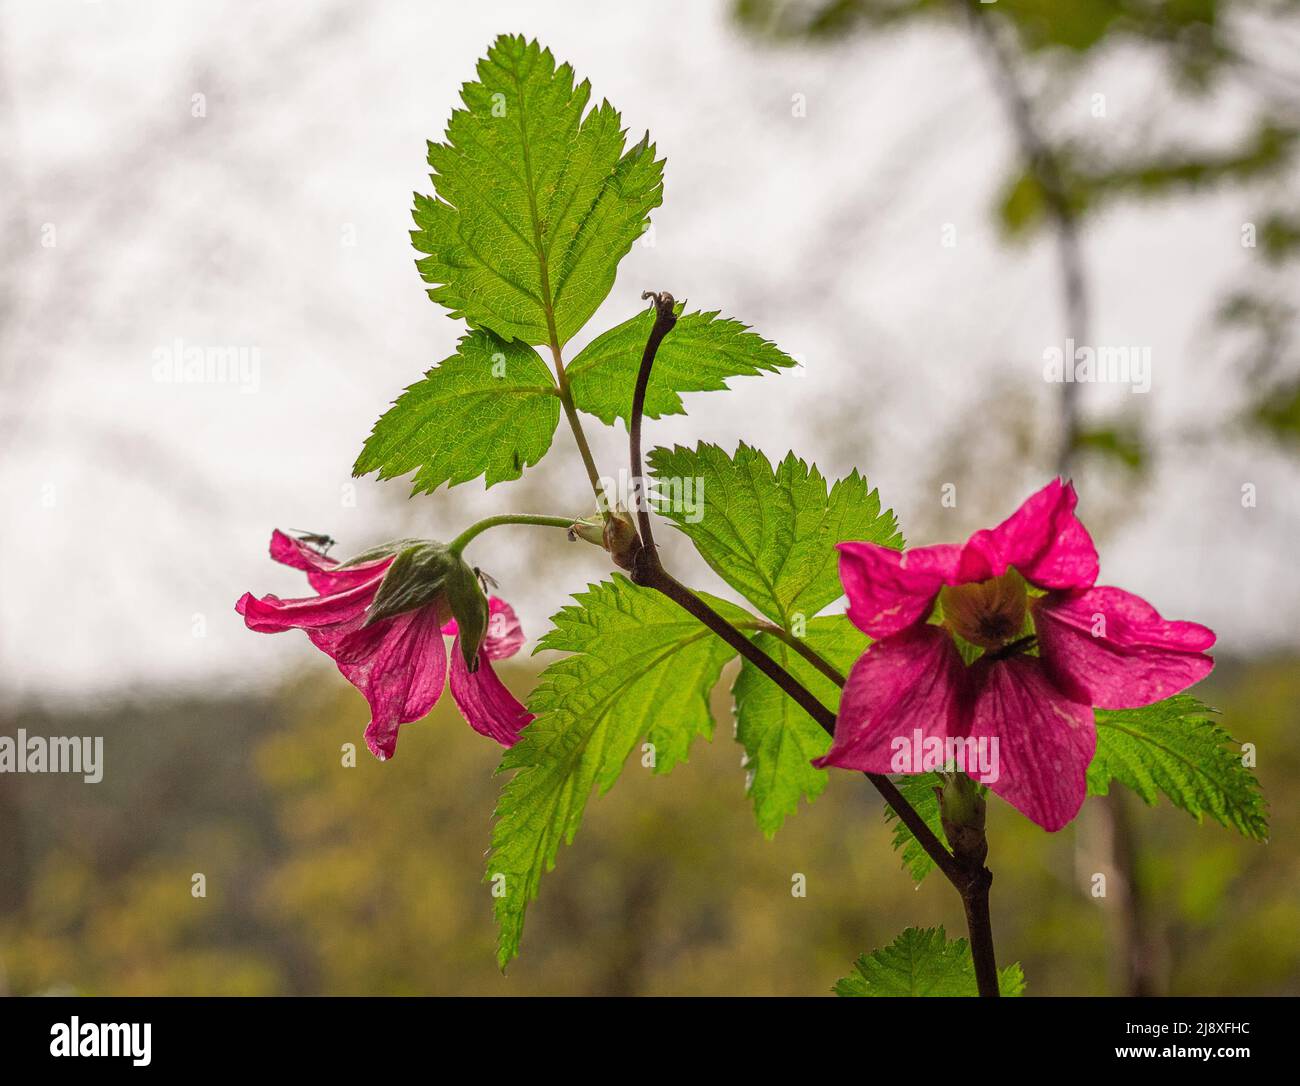 Salmonberry flower Rubus spectibilis in a forest on the blurred background, nobody, selective focus. Stock Photo